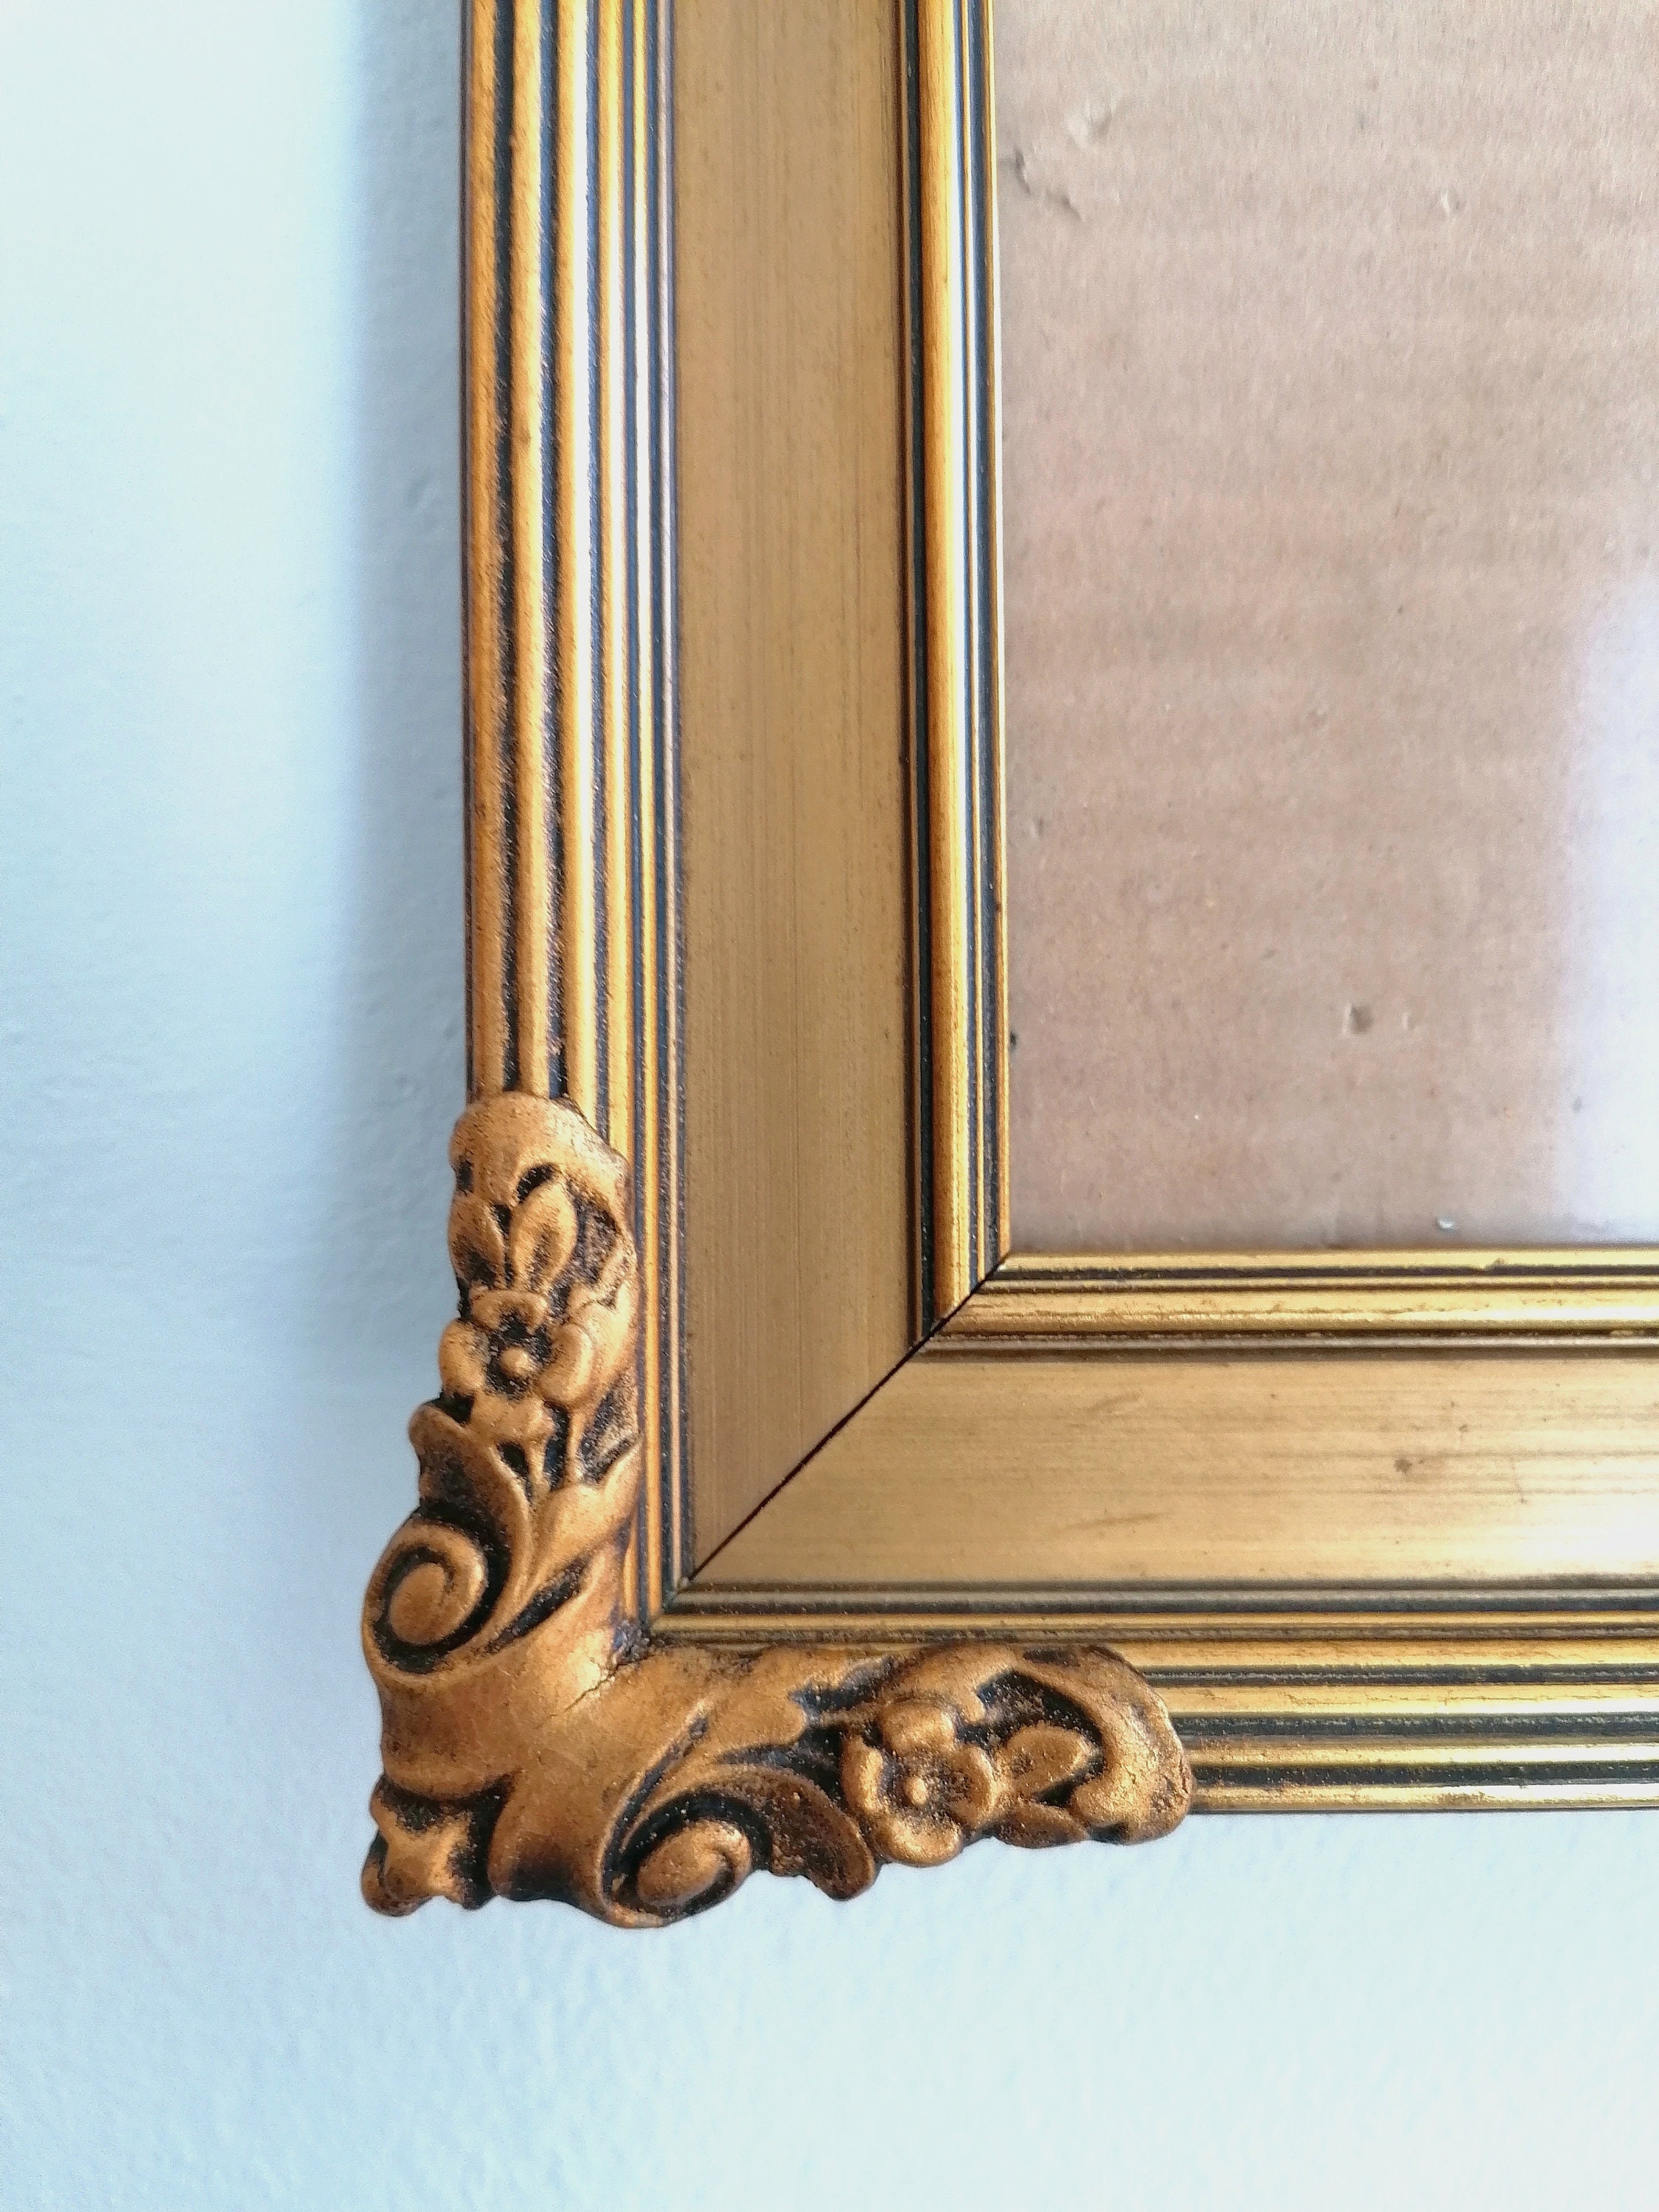 Antique Gilded Picture Frames 5x7 for Wall and Tabletop — Simon's Shop Home  & Gifts